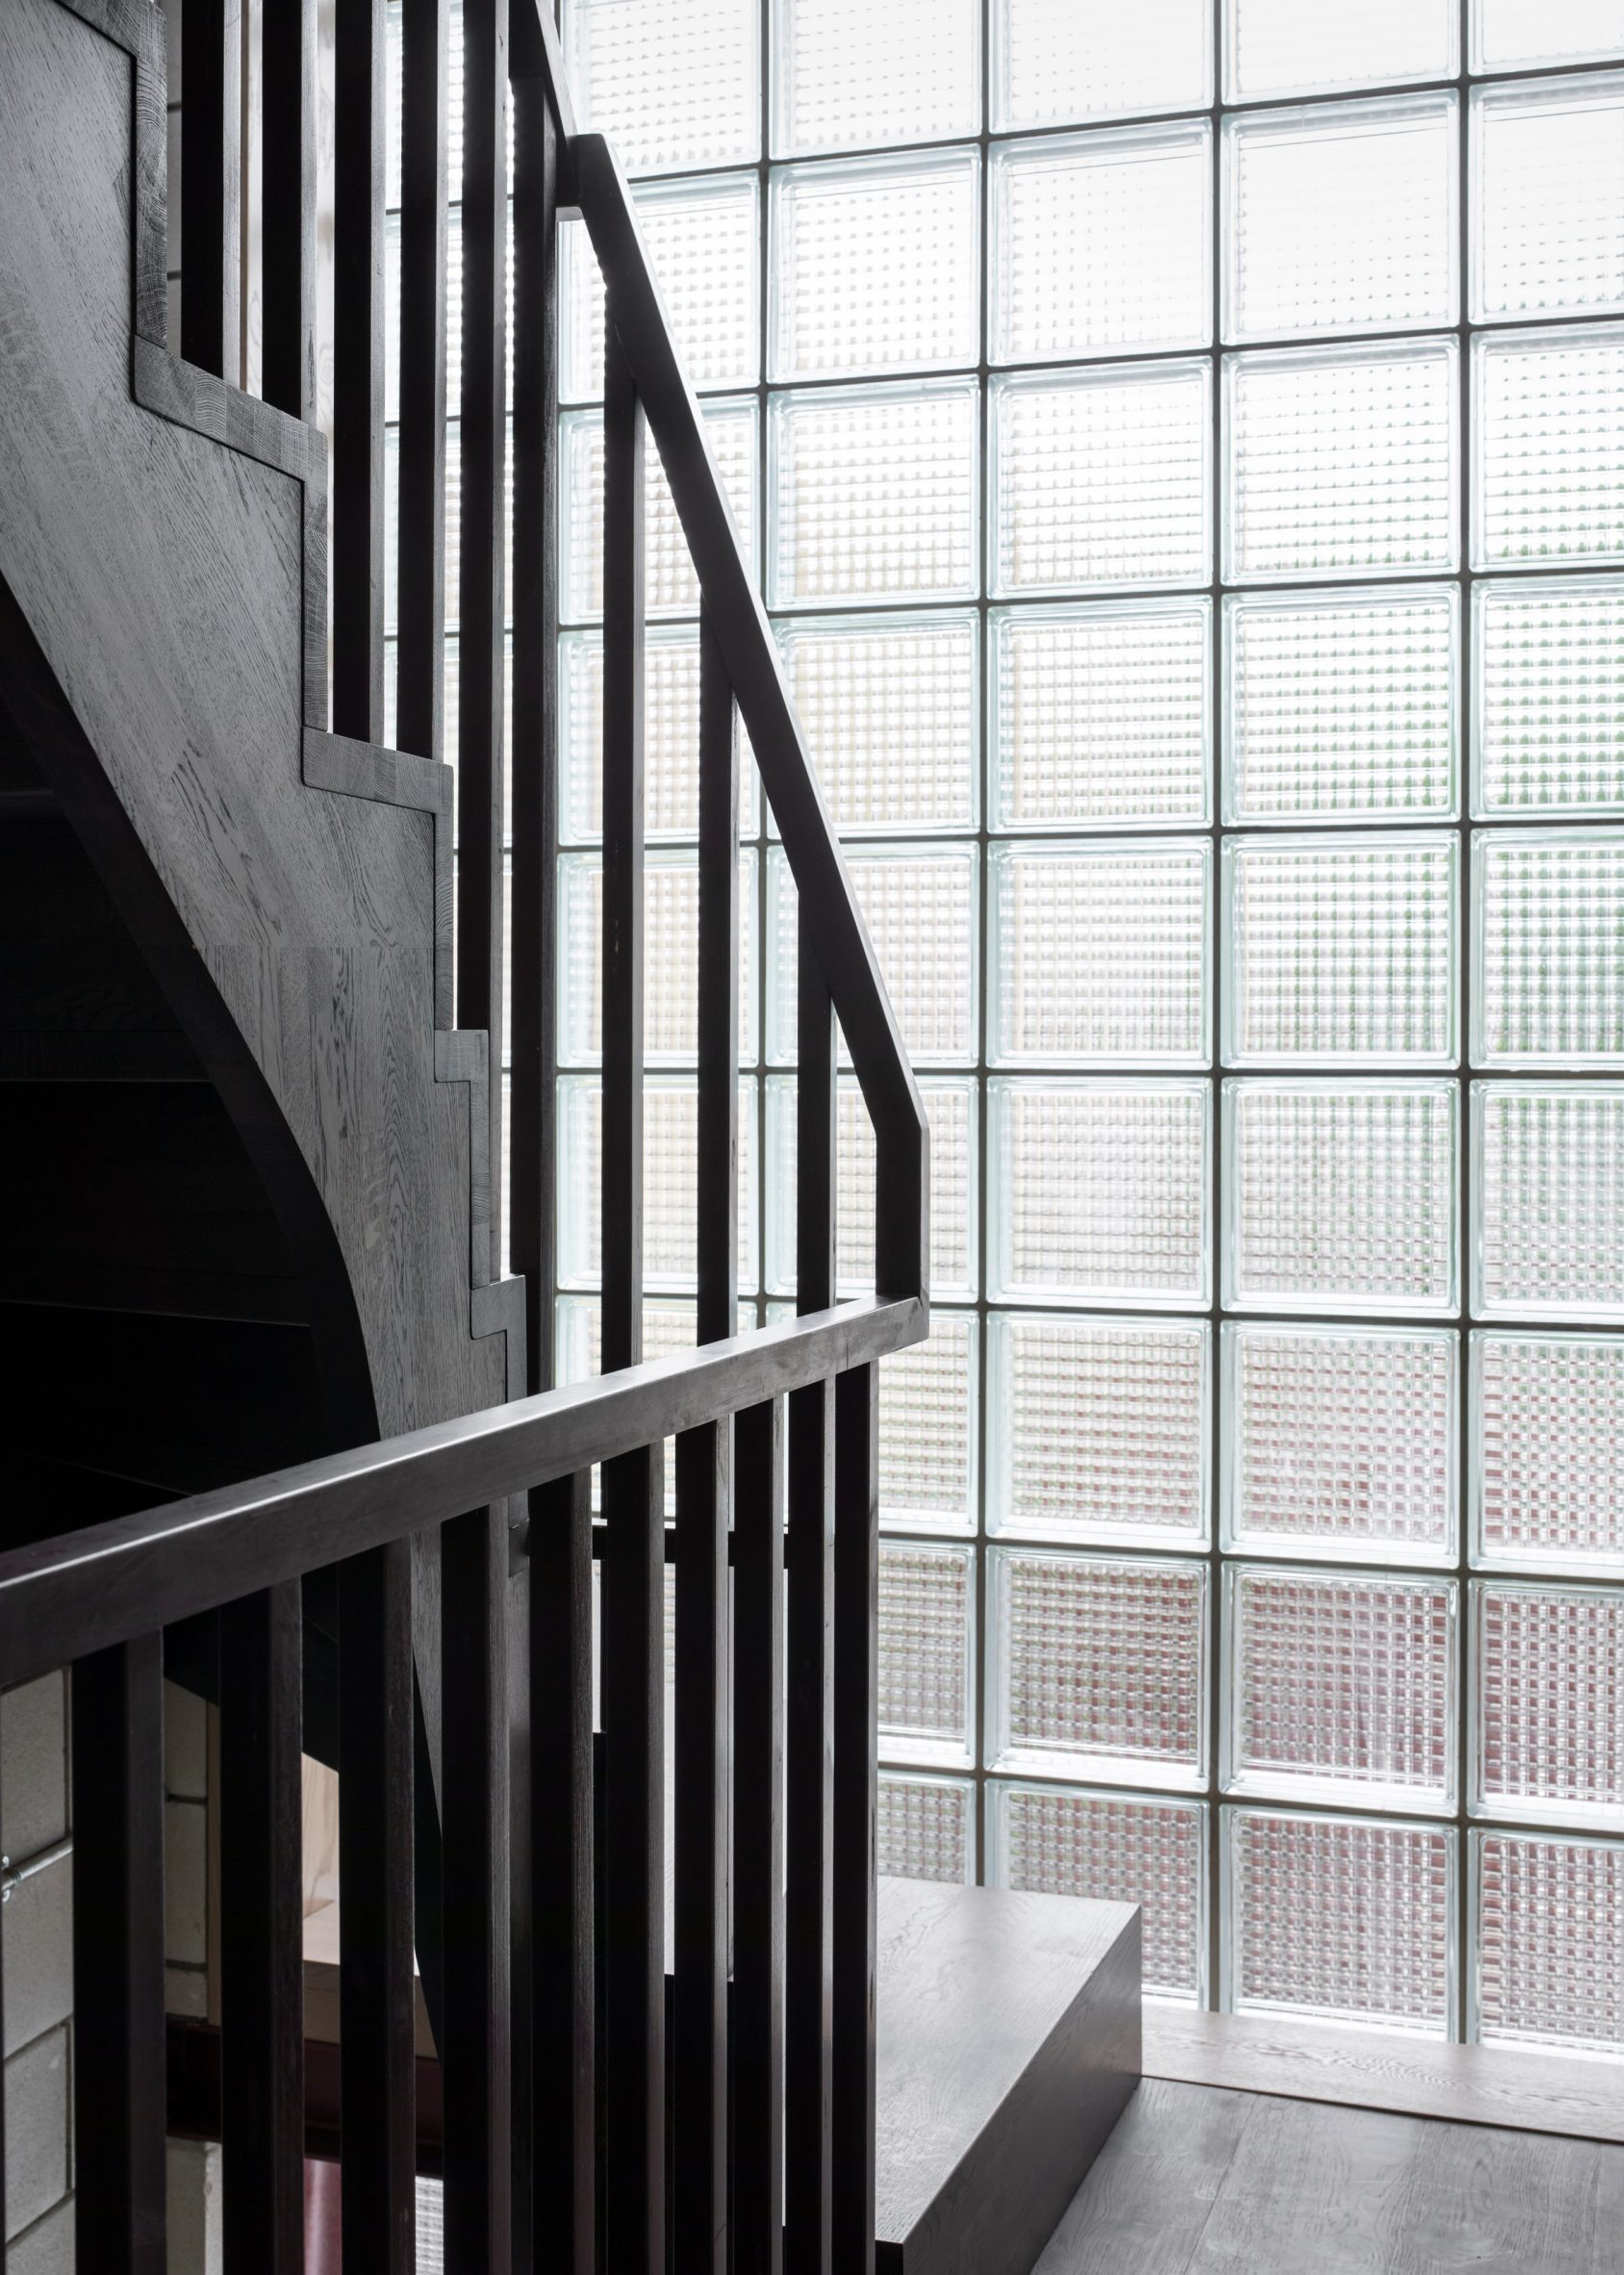 Stairwell lined with glass blocks